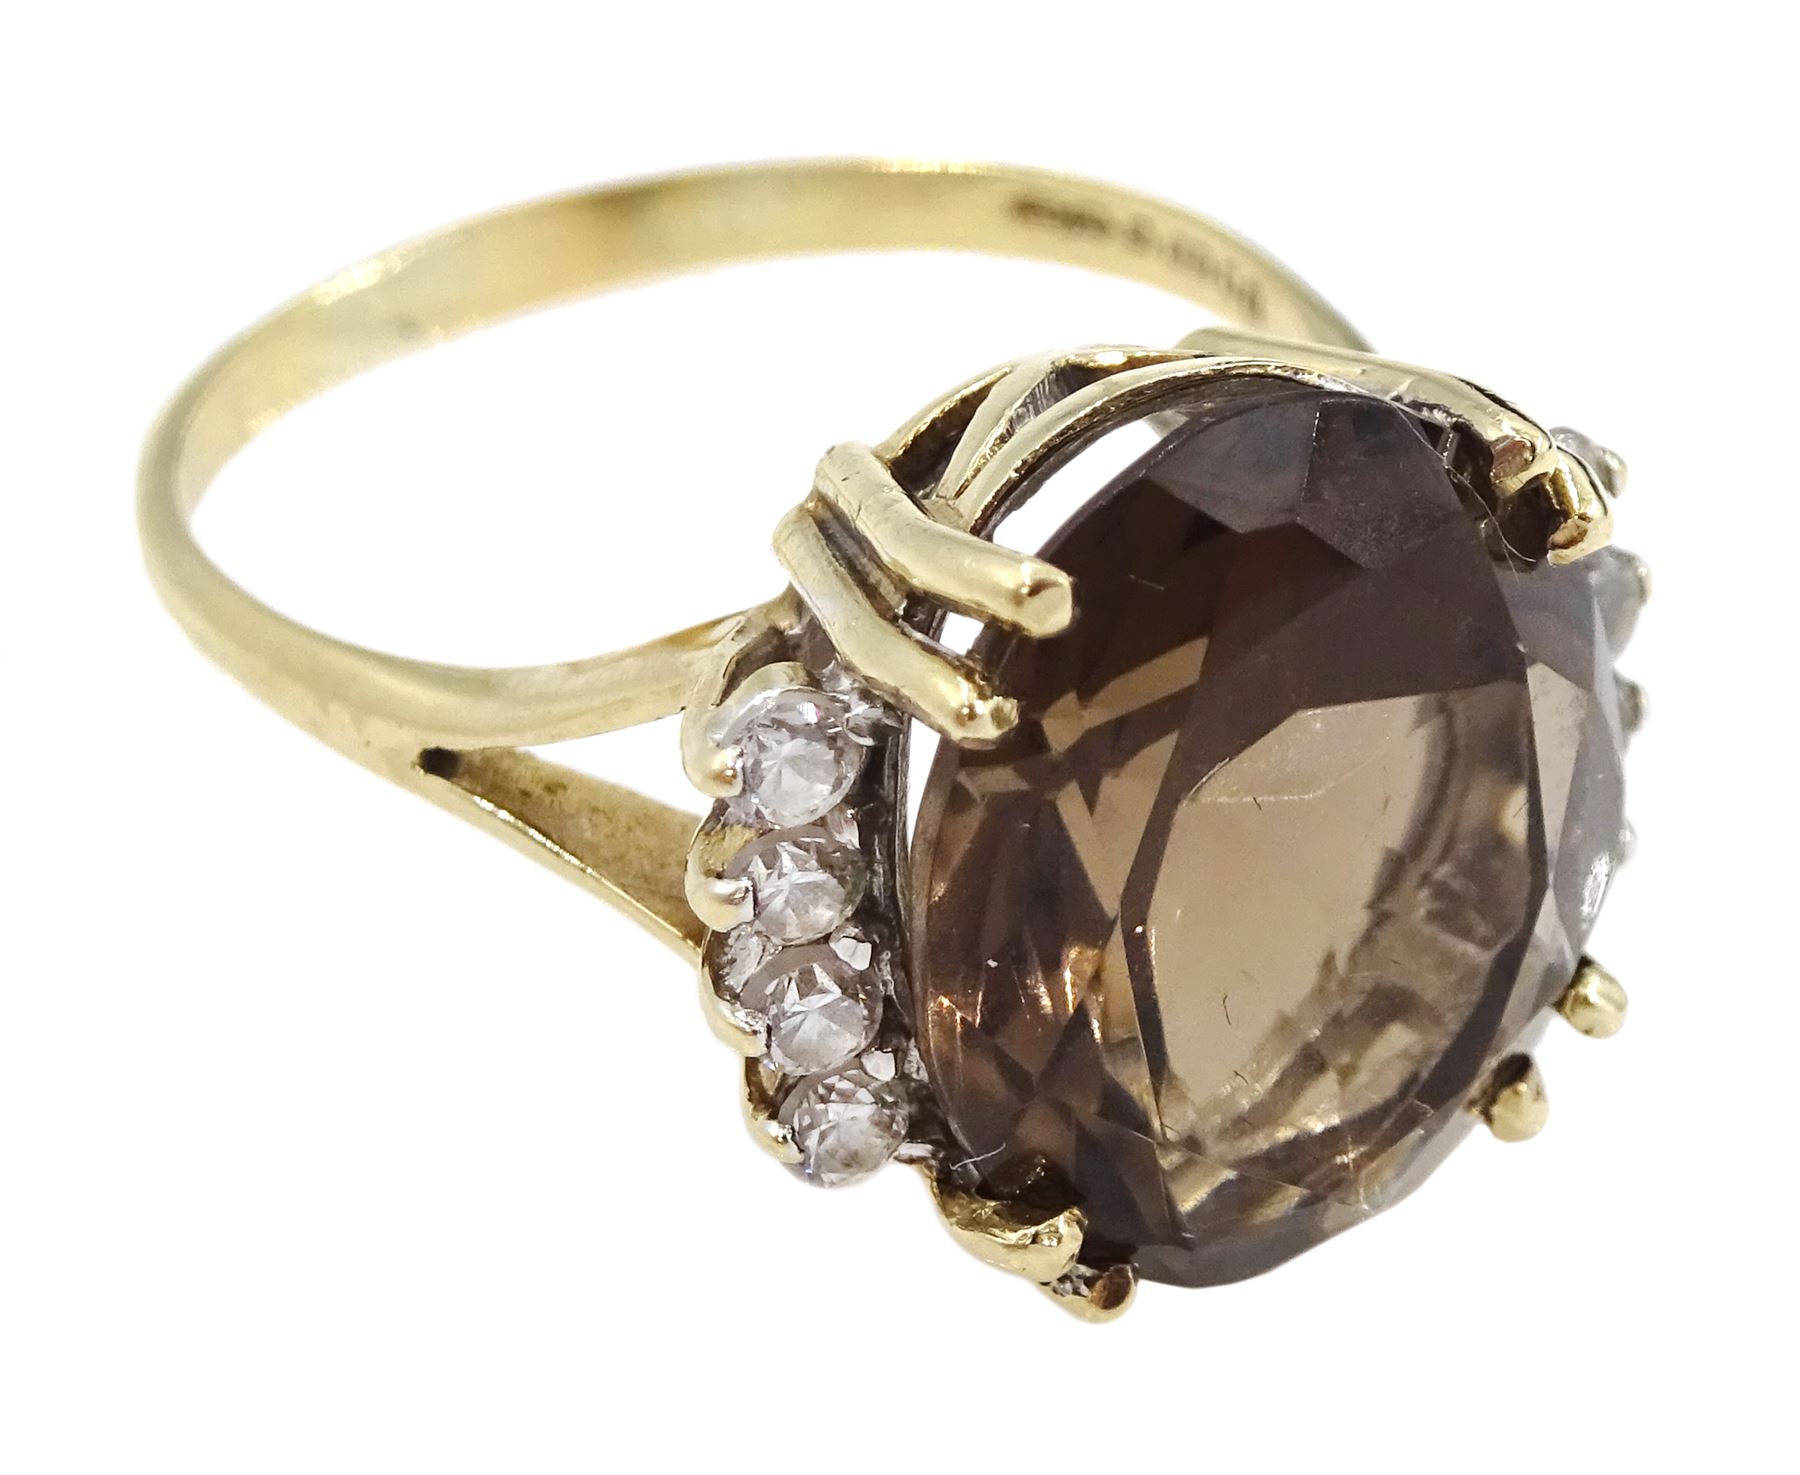 9ct gold smoky quartz and cubic zirconia ring - Image 2 of 2